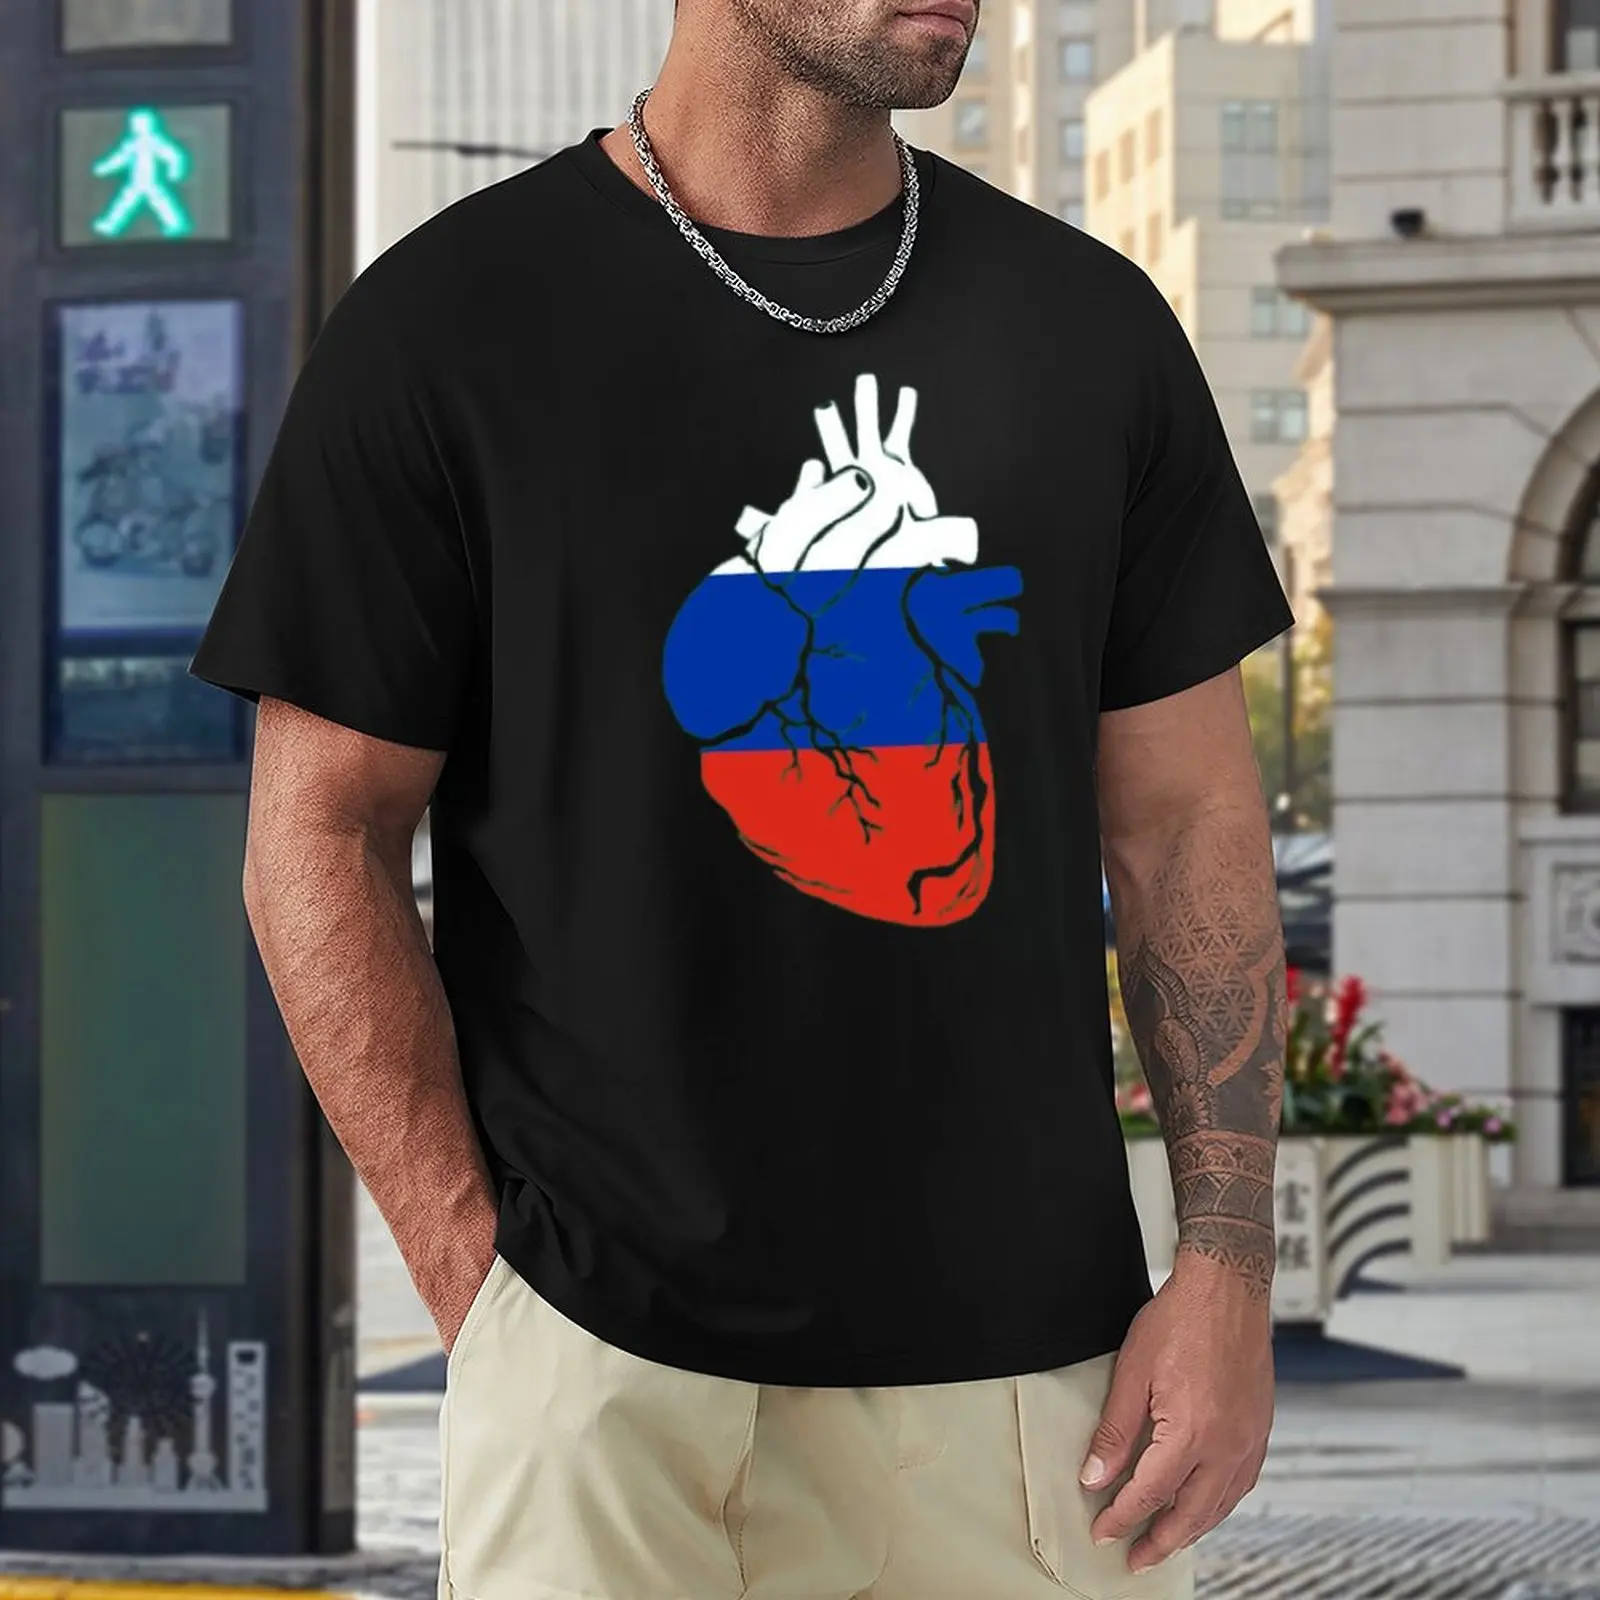 

Russia Flag, Anatomical Heart T-shirt Crewneck Movement Funny Novelty T-shirts Casual Graphic Fitness USA Size